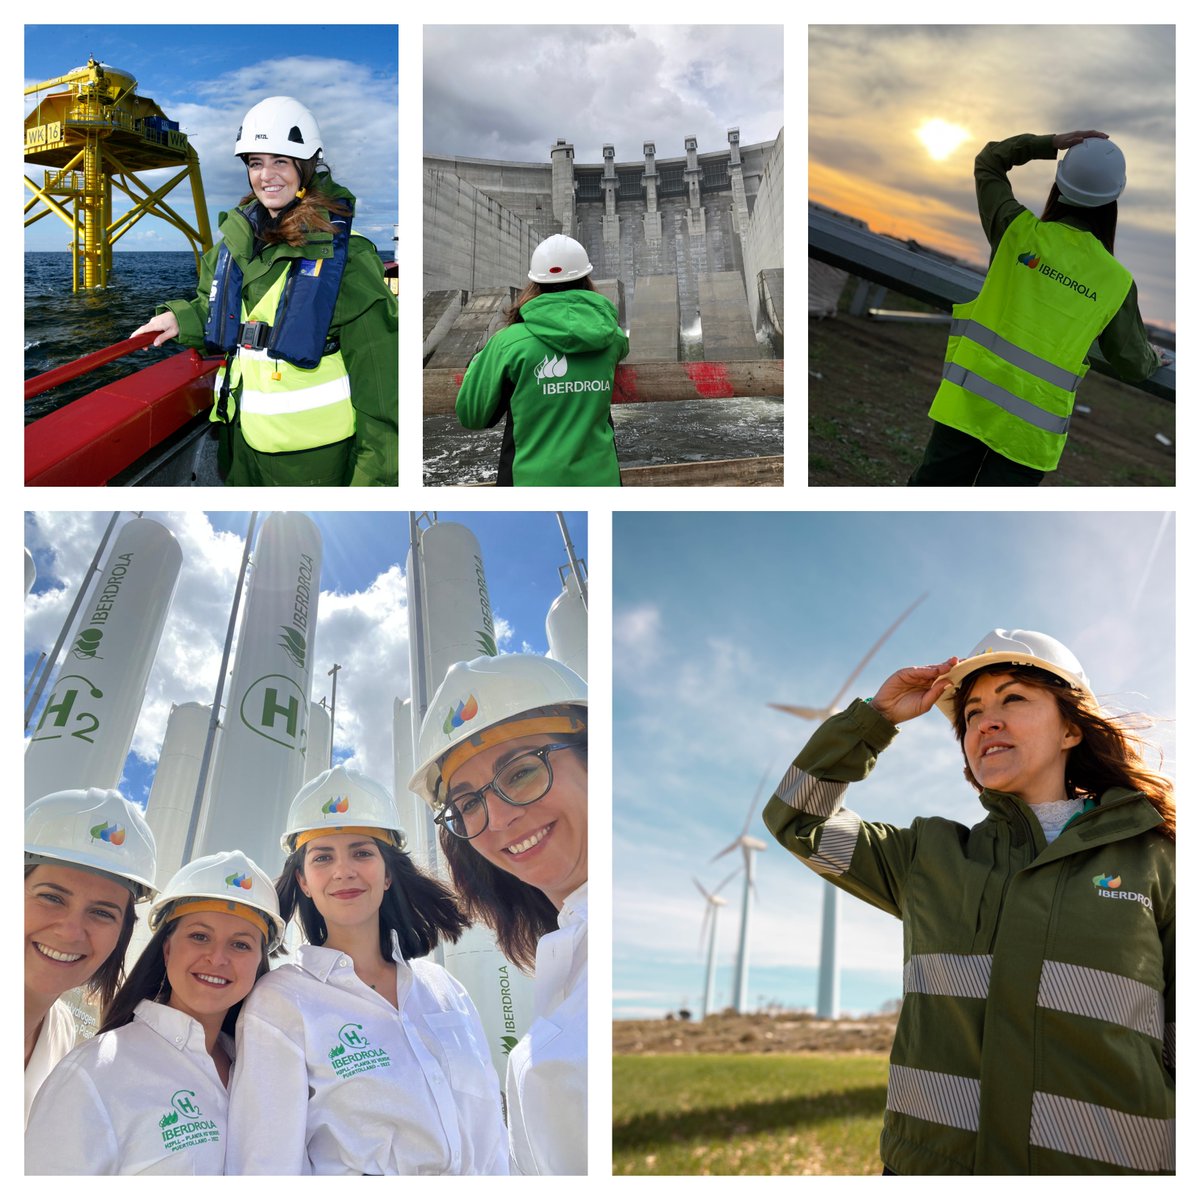 🙋🏻‍♀️We need the TALENT of ALL to continue building the energy of the future 👷🏼‍♀️👩🏾‍💼👩🏽‍🎓 

#INWED23 #InternationalWomenInEngineeringDay #WomenInTech